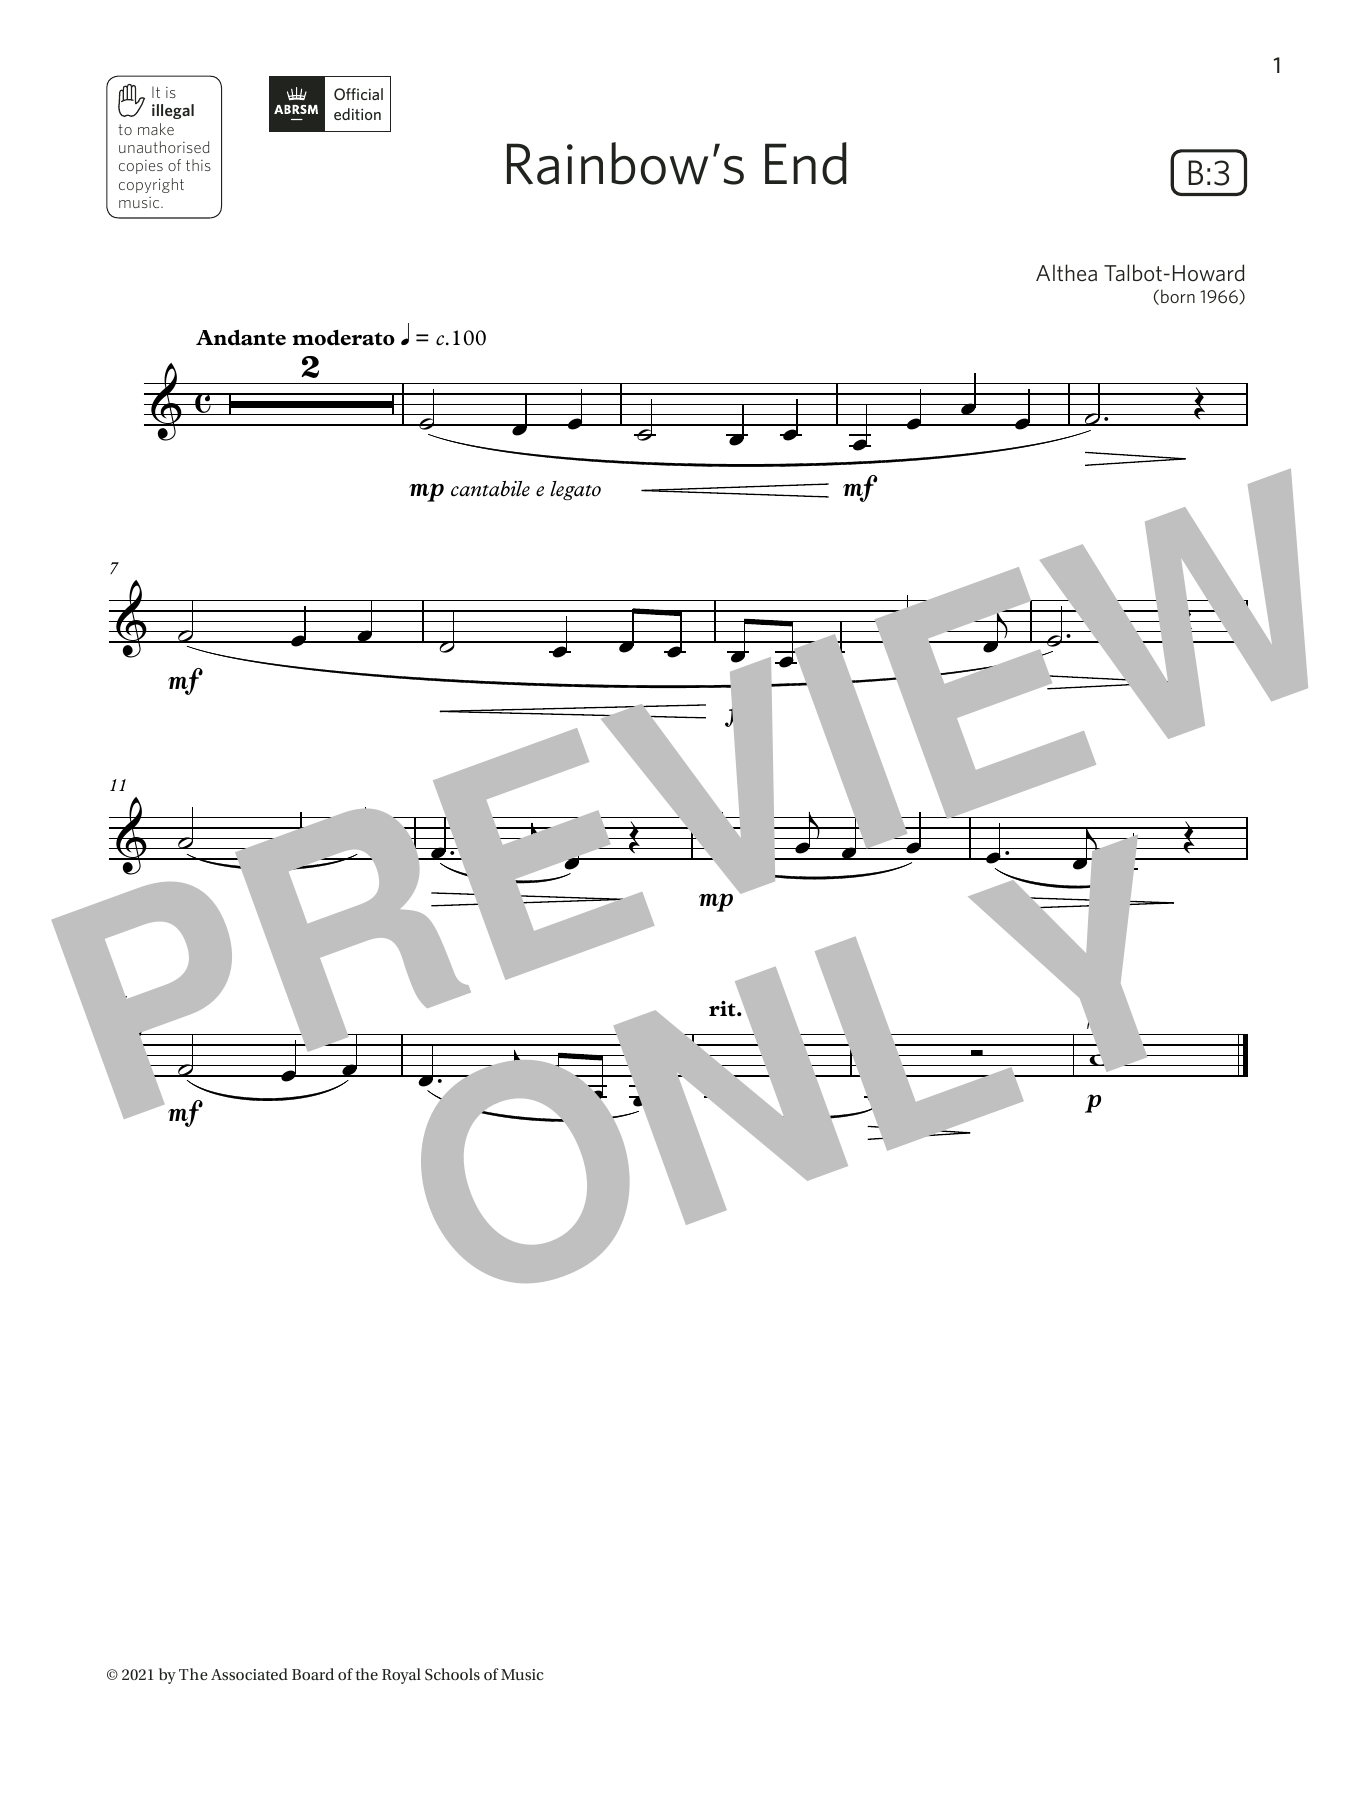 Download Althea Talbot-Howard Rainbow's End (Grade 1 List B3 from the Sheet Music